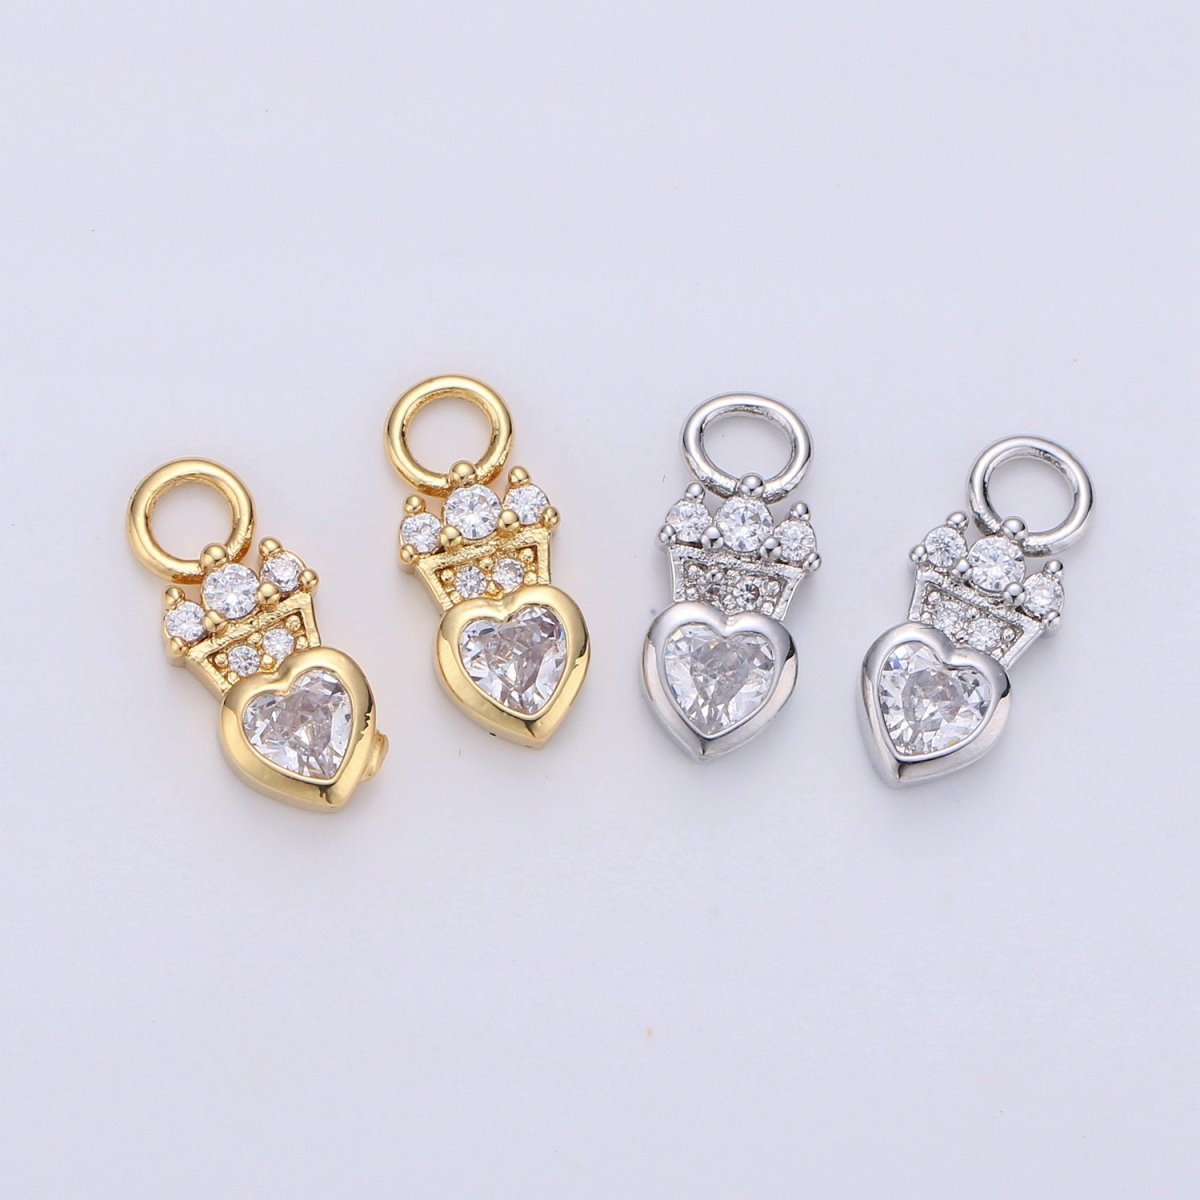 24K Gold Filled Dainty Heart Love Charm with Micro Pave Cubic Zirconia CZ Stone for Crown Necklace or Bracelet Component C-933 C-934 - DLUXCA